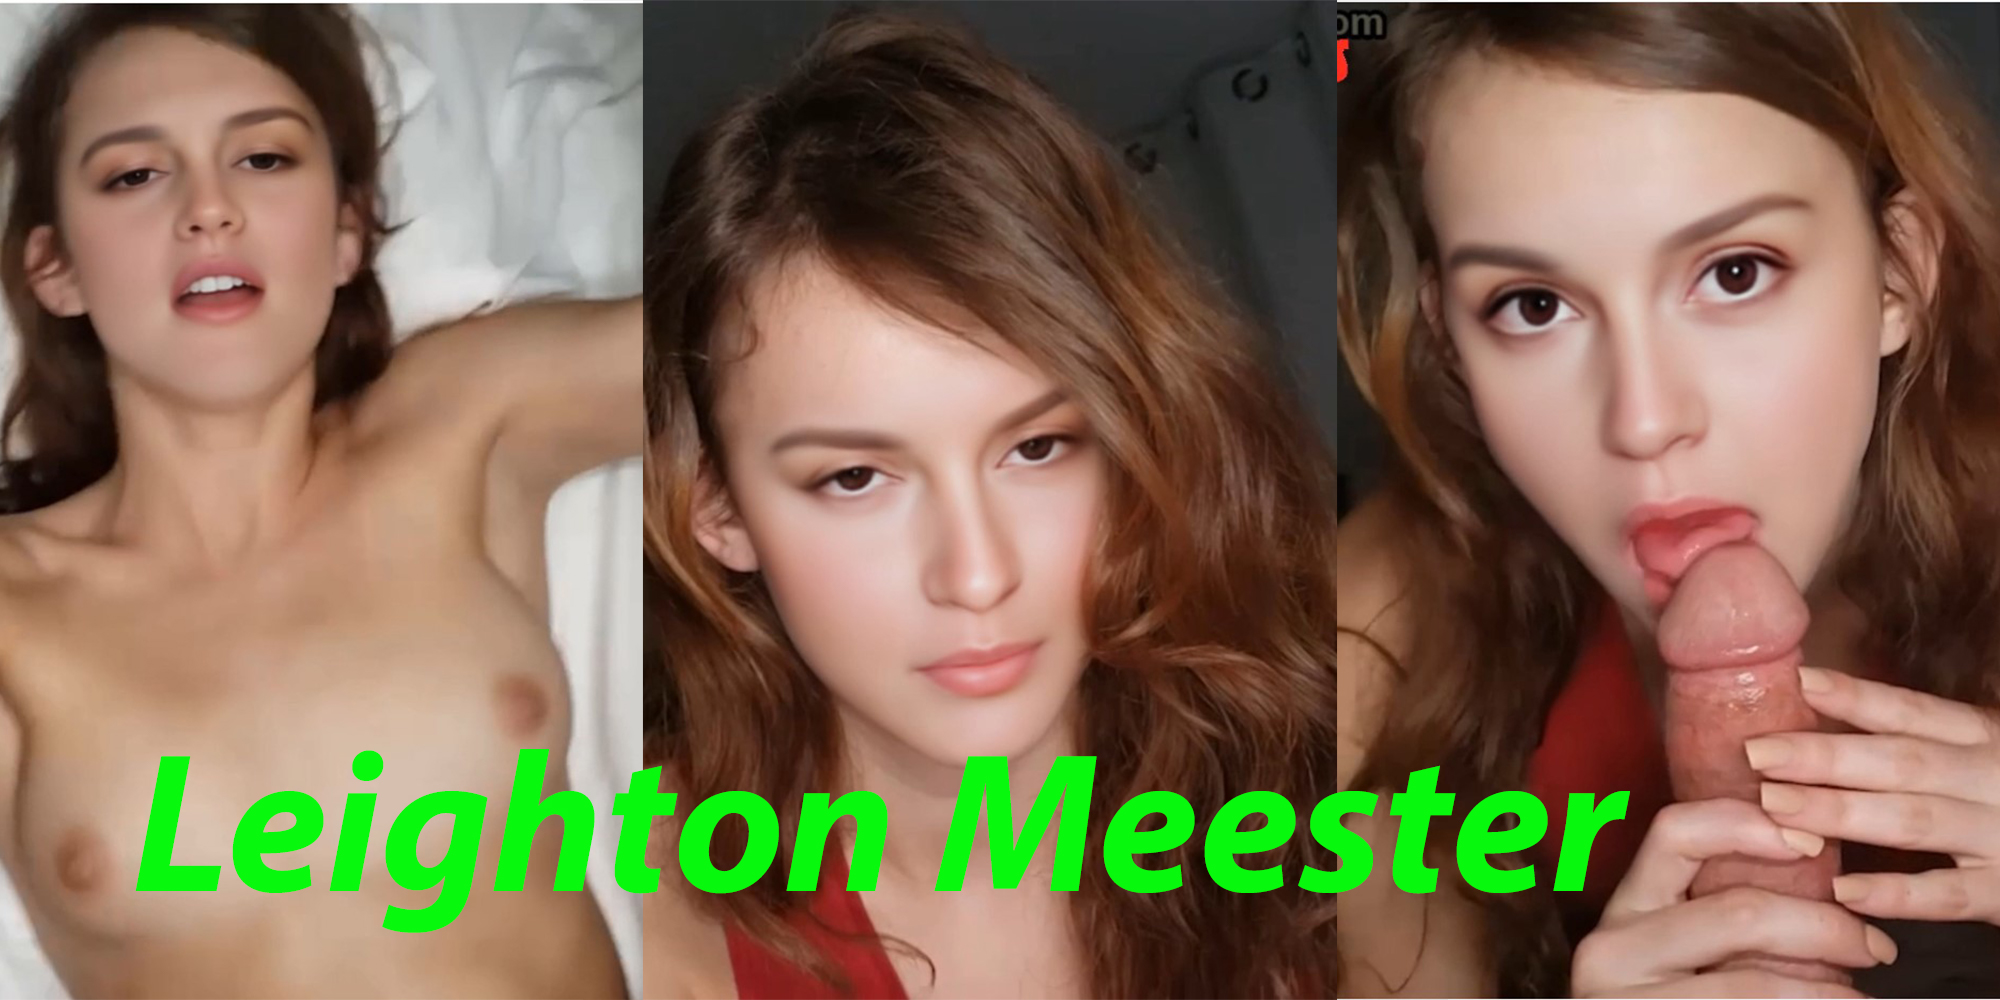 Leighton Meester sleeps with you (full version)